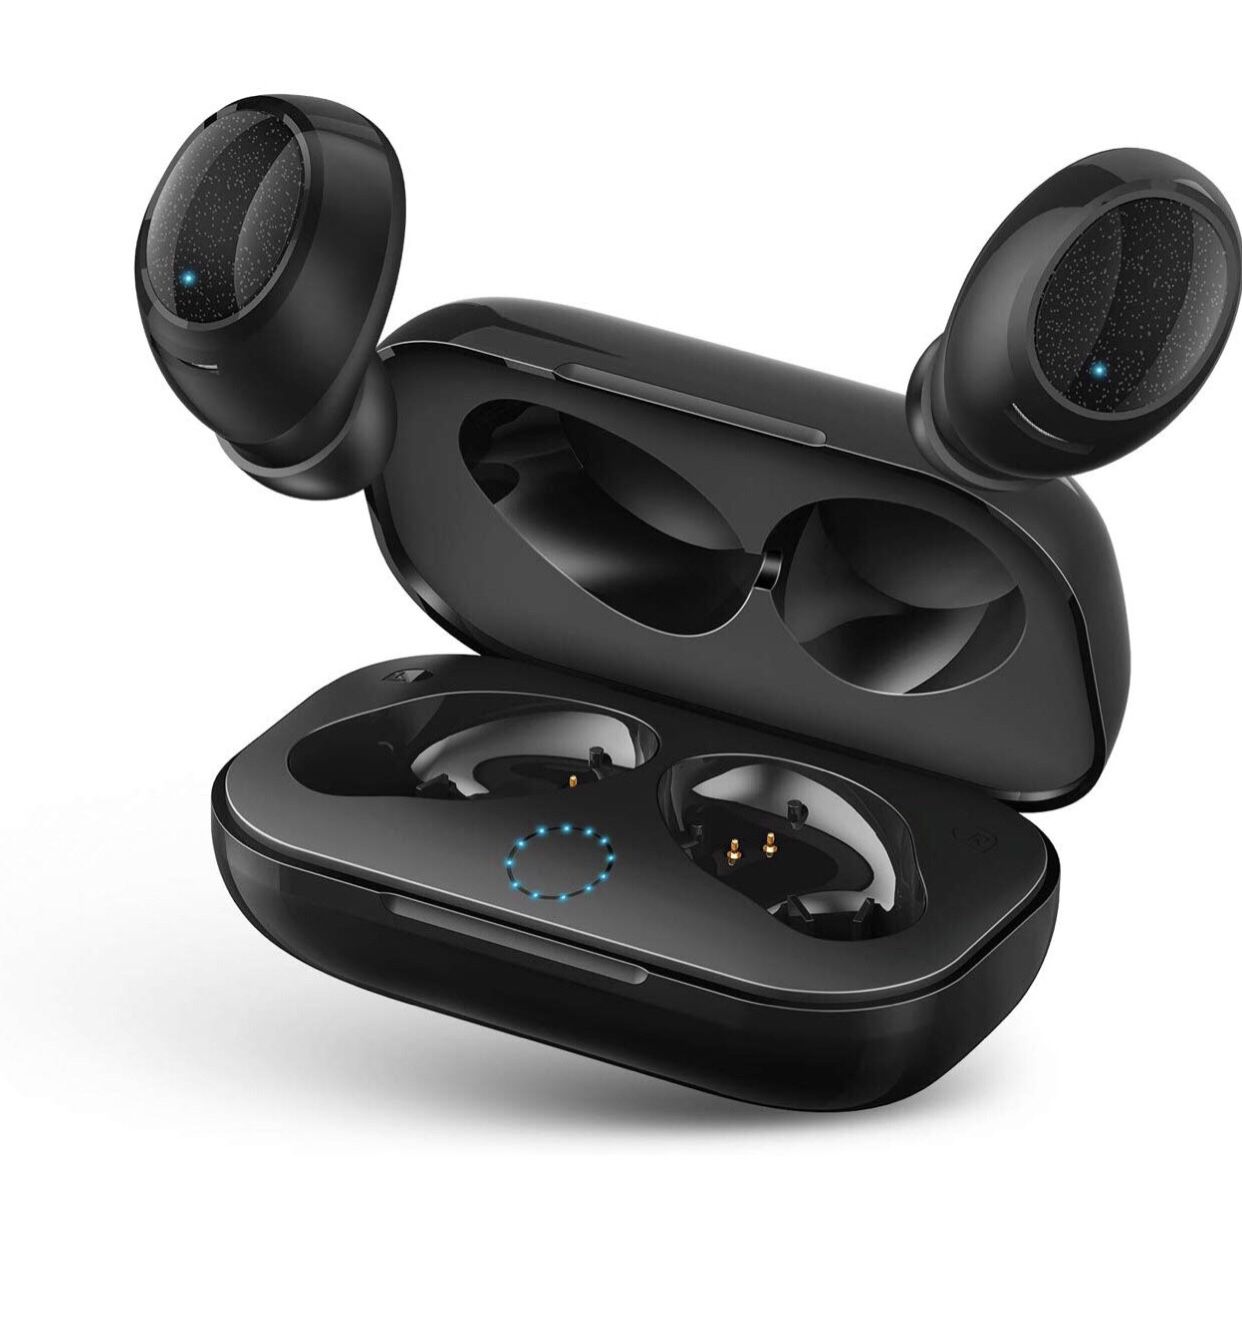 [Updated Version] Wireless Earbuds,True Wireless Headphones Bluetooth 5.0 Headset Wireless Earphones Charging Dock Case Up to 15Hour Play HD Stereo S